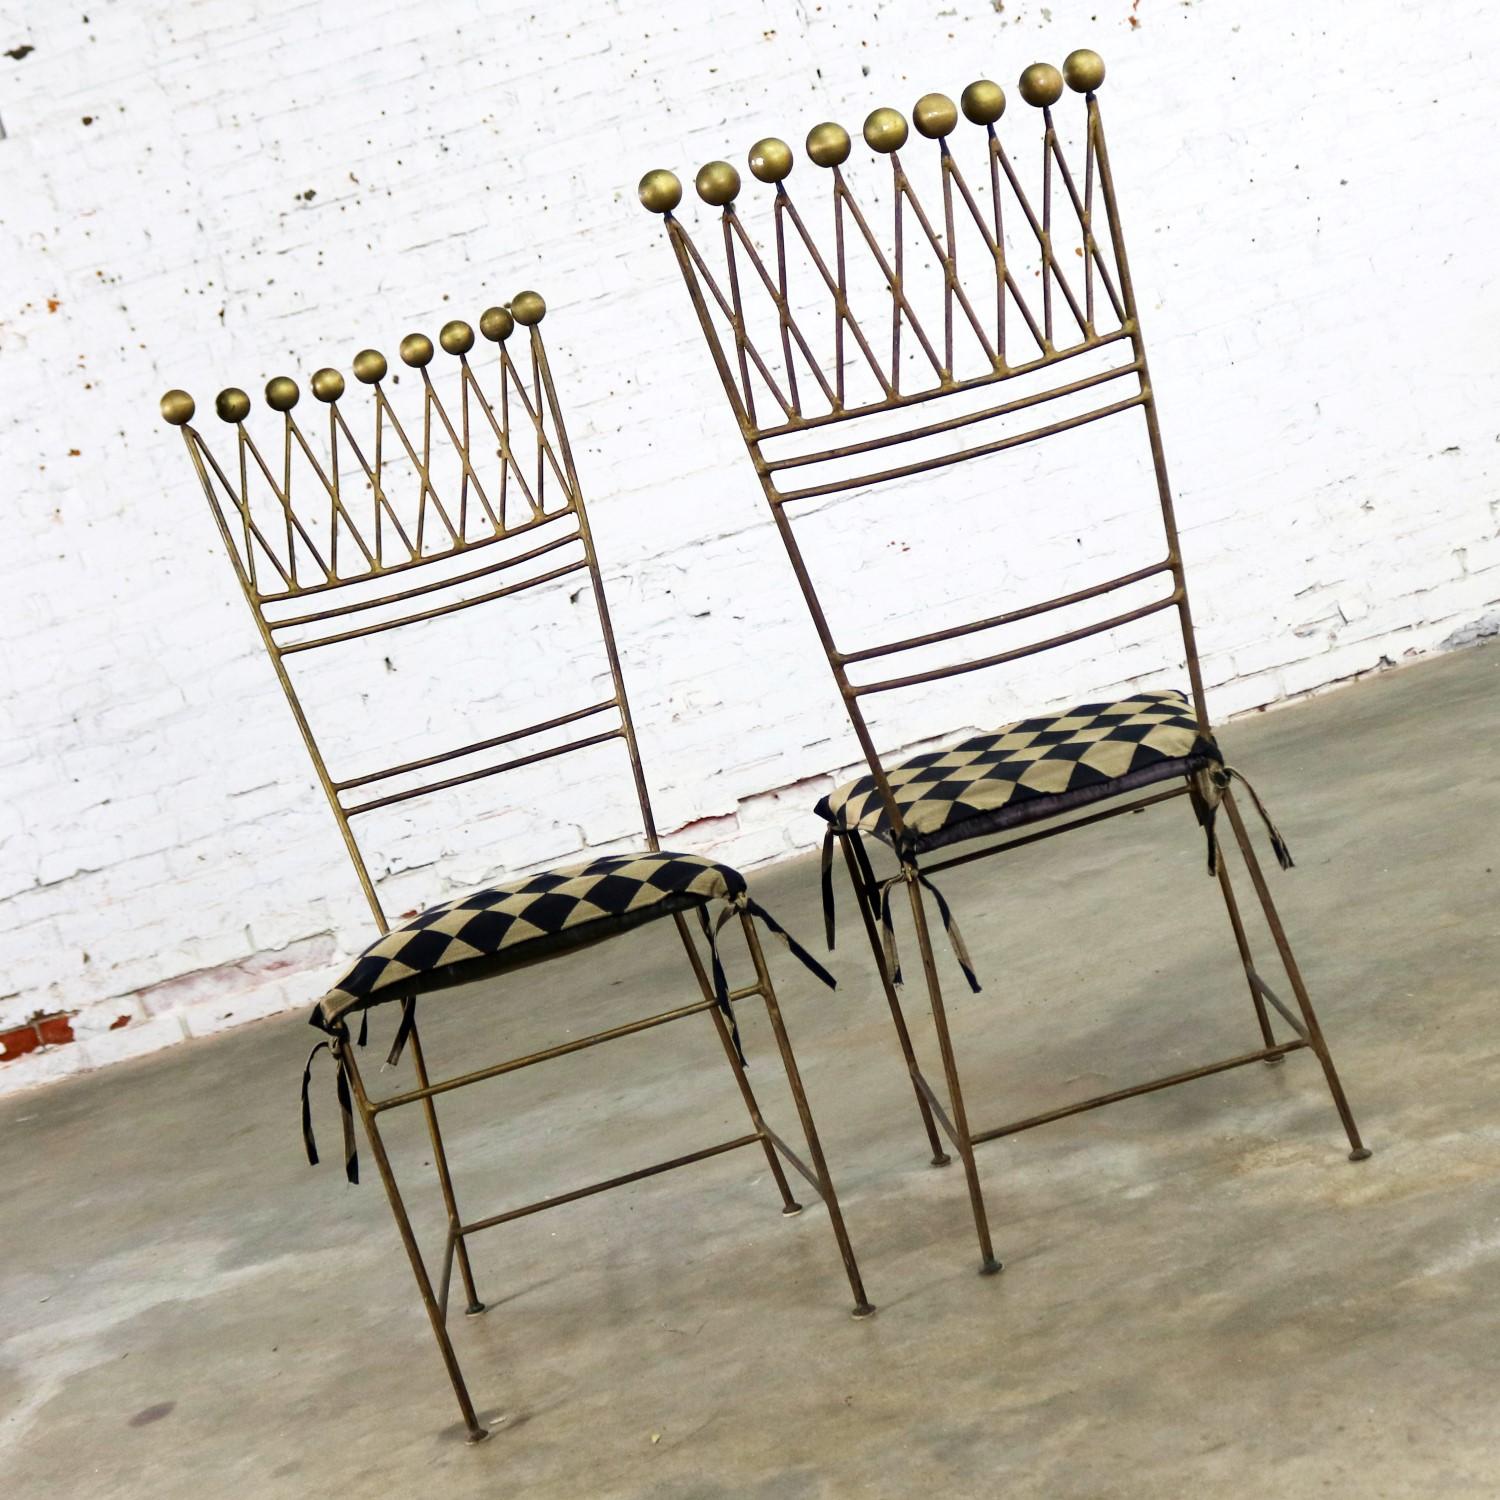 Pair of Gilt Iron Chairs Crown or Harlequin Style Ball Finials Art Deco 1